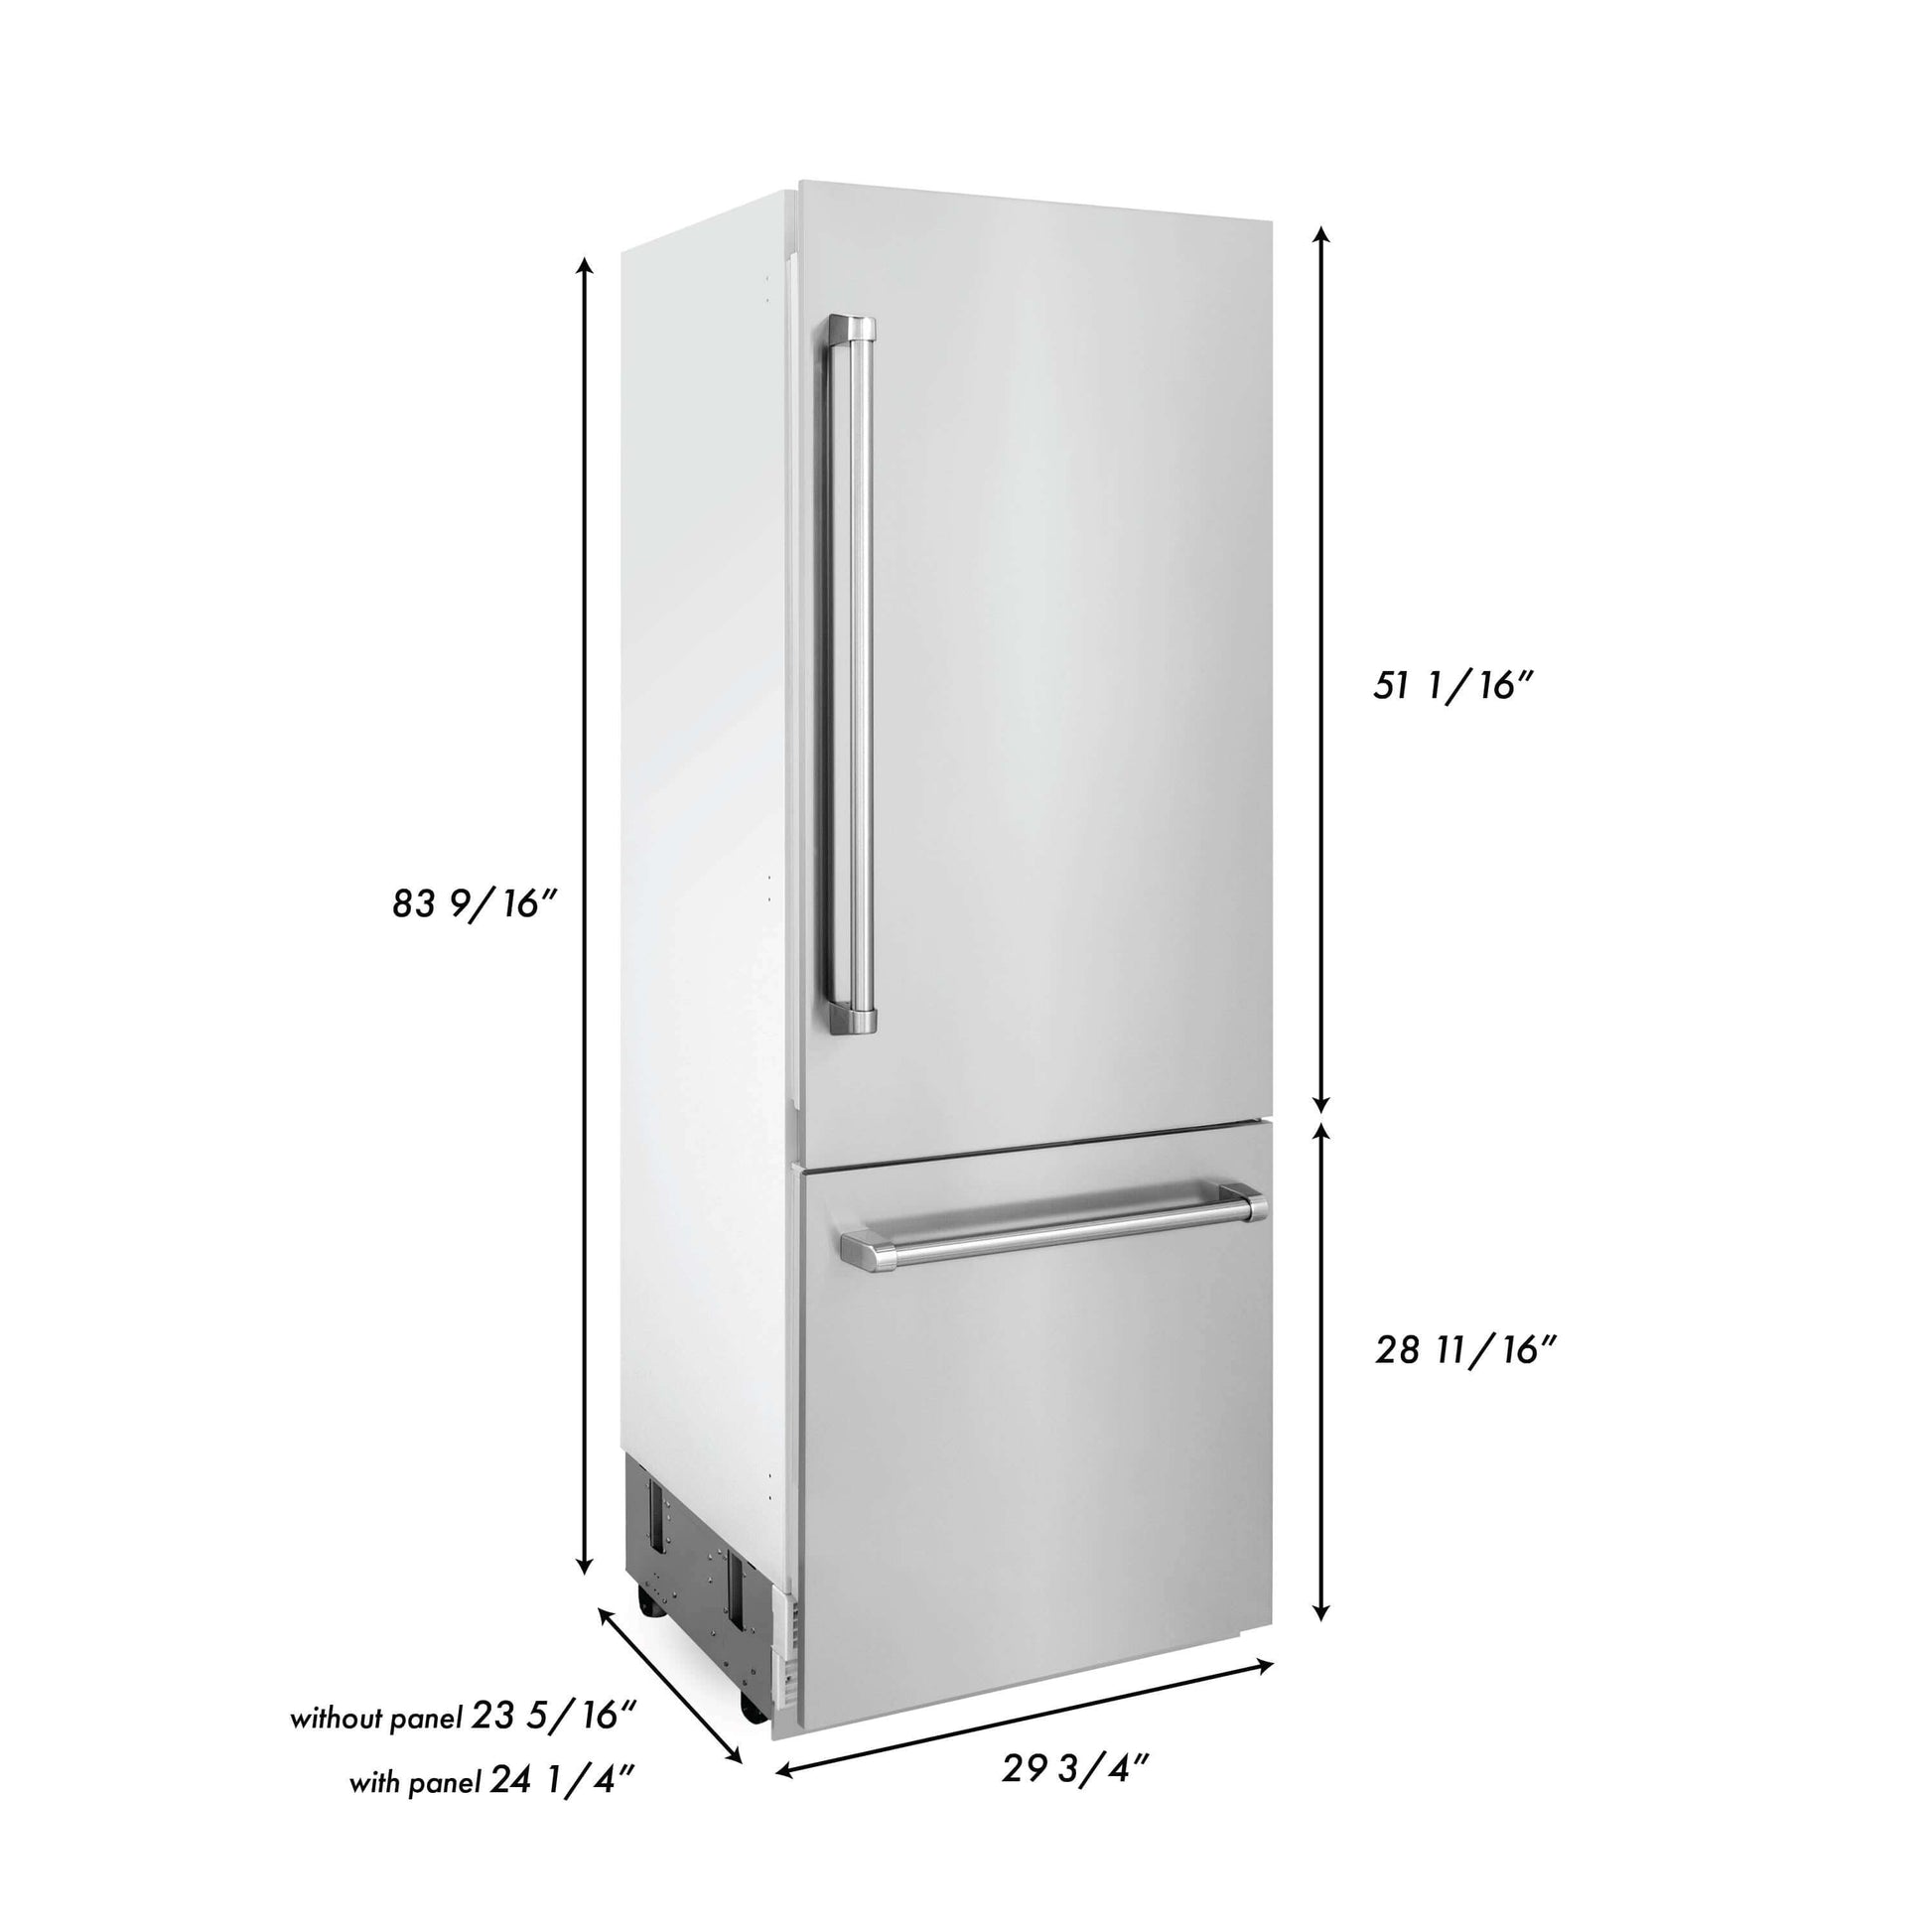 ZLINE 30 in. 16.1 cu. ft. Built-In 2-Door Bottom Freezer Refrigerator with Internal Water and Ice Dispenser in Stainless Steel (RBIV-304-30) dimensional diagram with measurements.